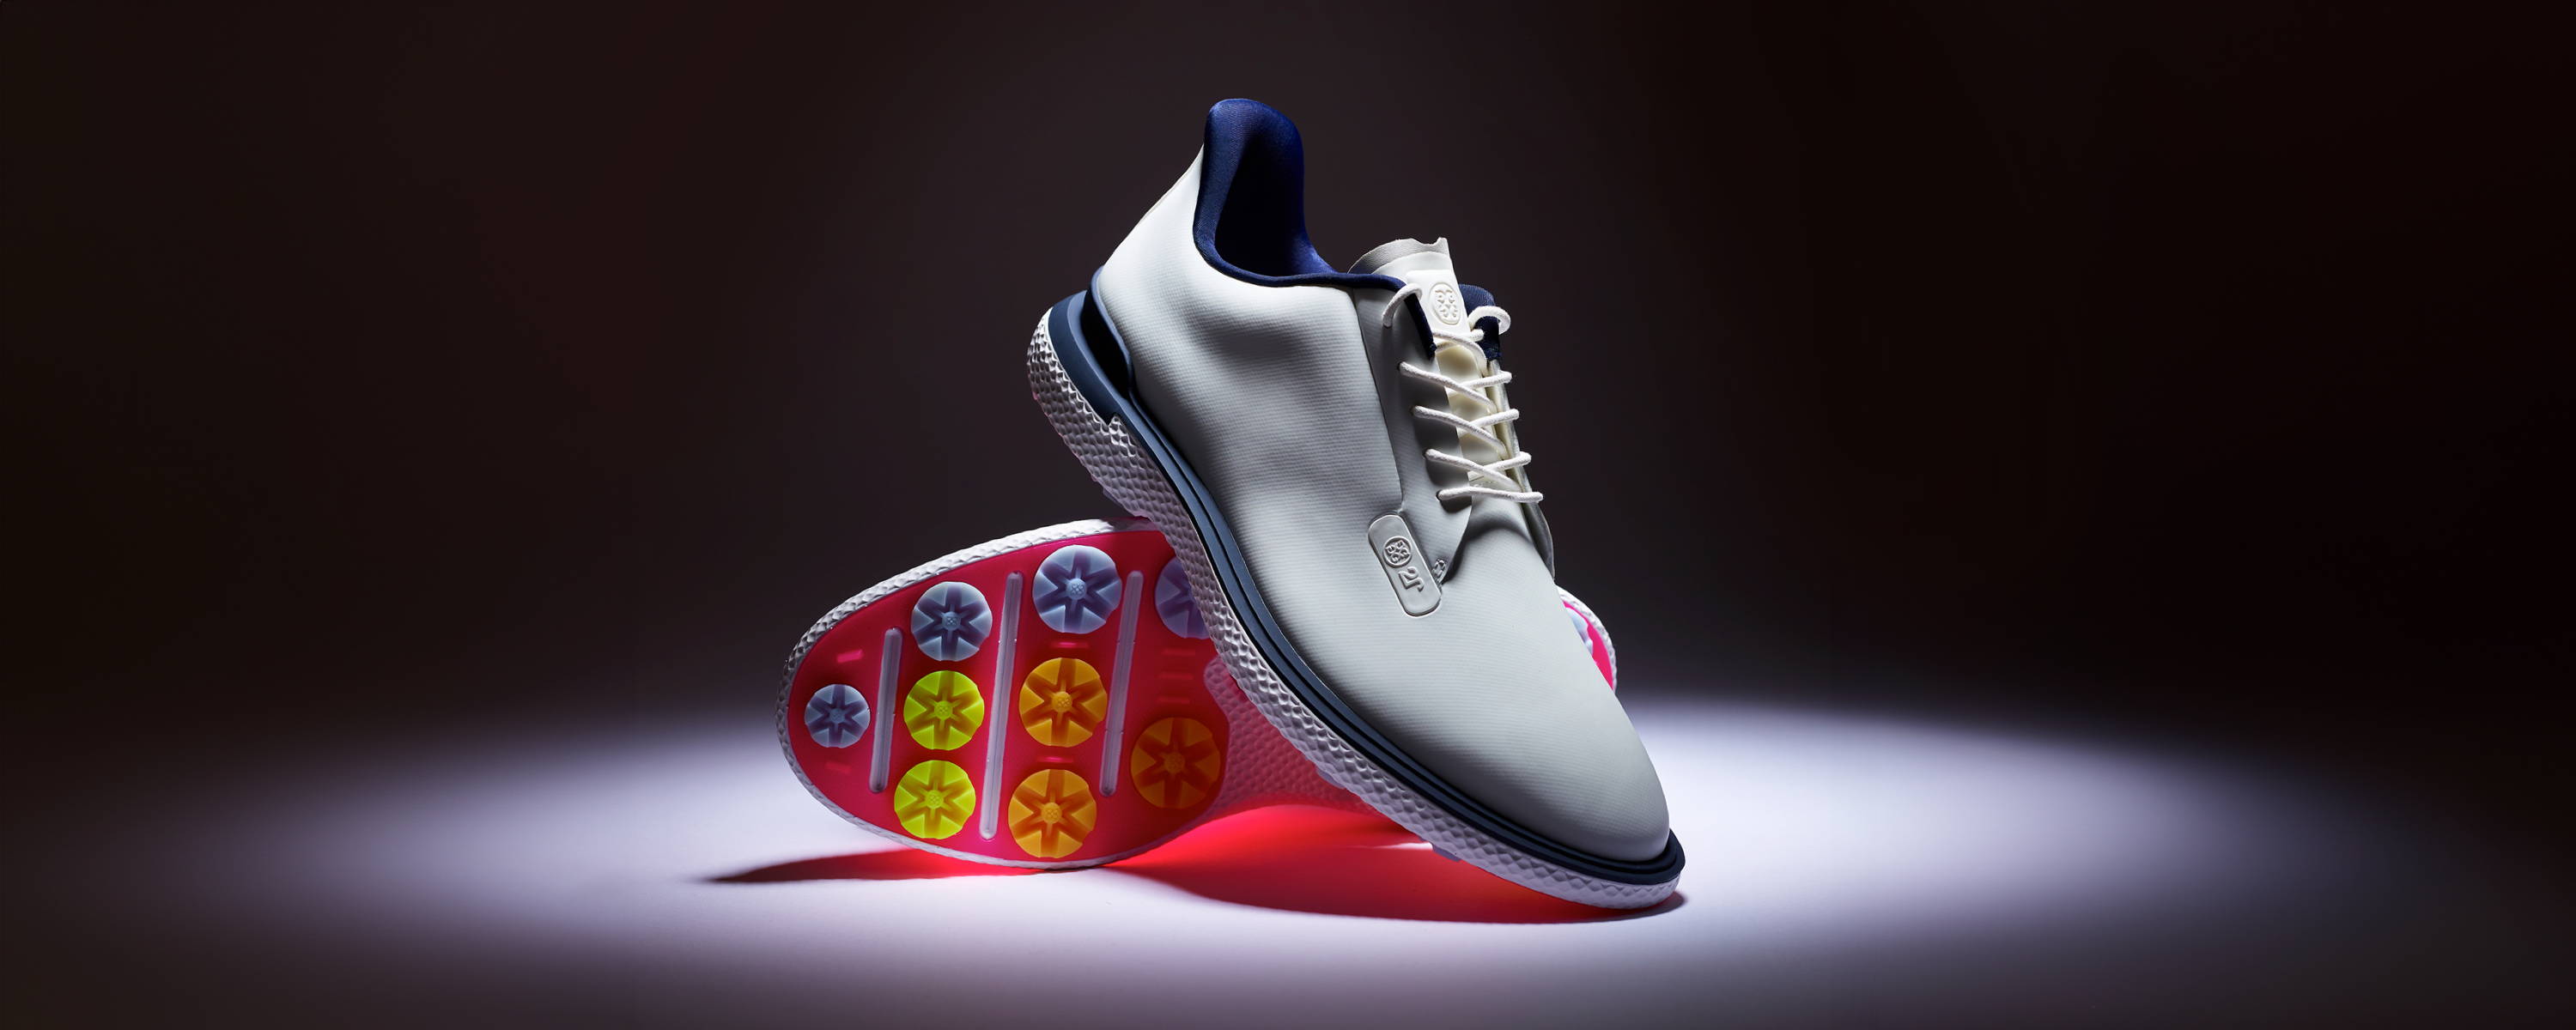 G/FORE golf shoes